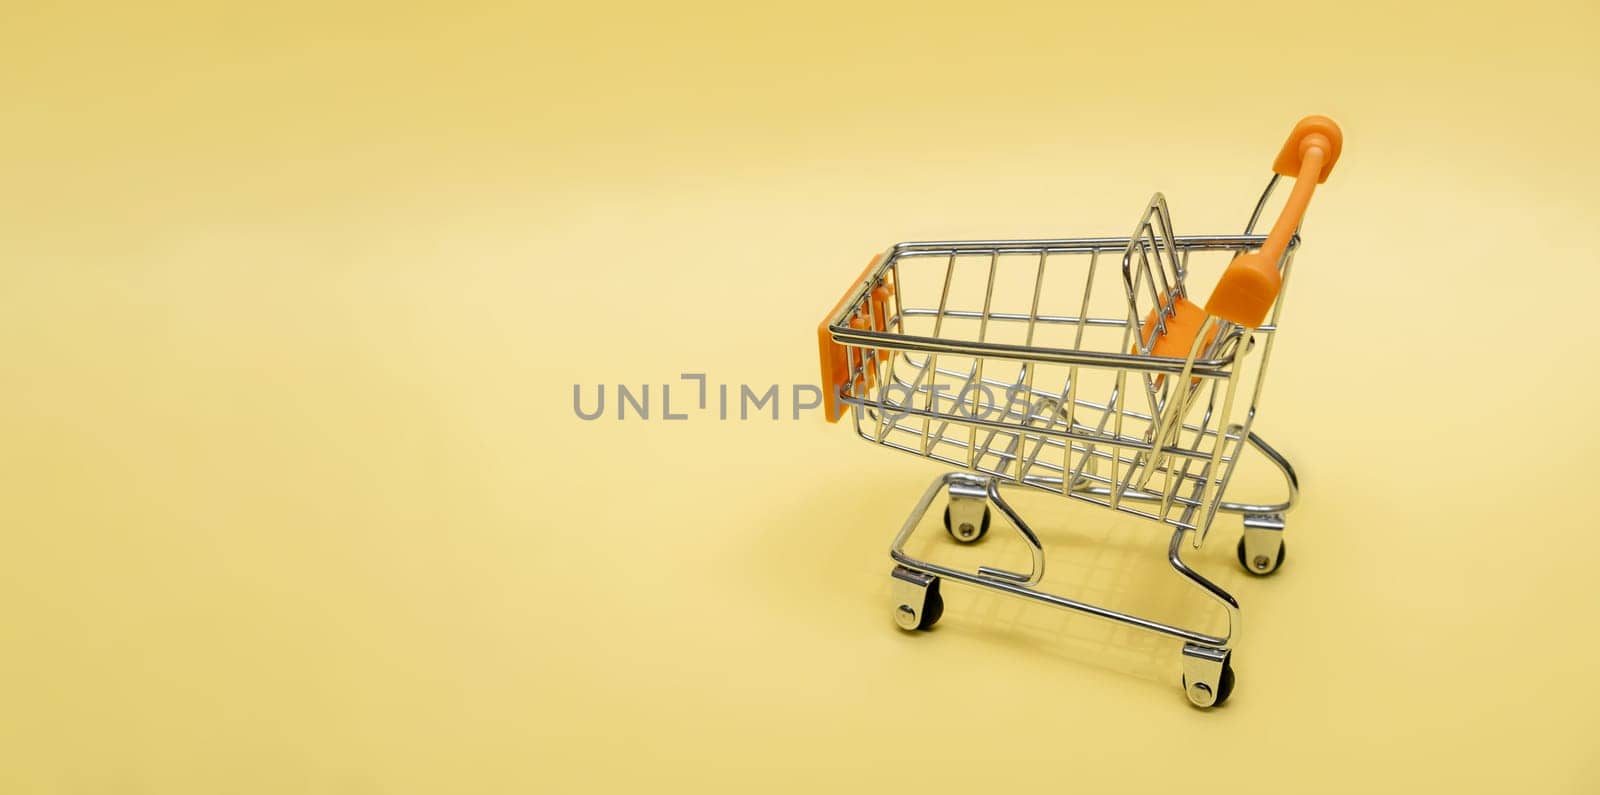 Small cart on a yellow background. Small supermarket grocery push cart for shopping. Shopaholic. Buyer. Shopping concept. Close-up. Isolated shopping trolley on a yellow background. Copy space.